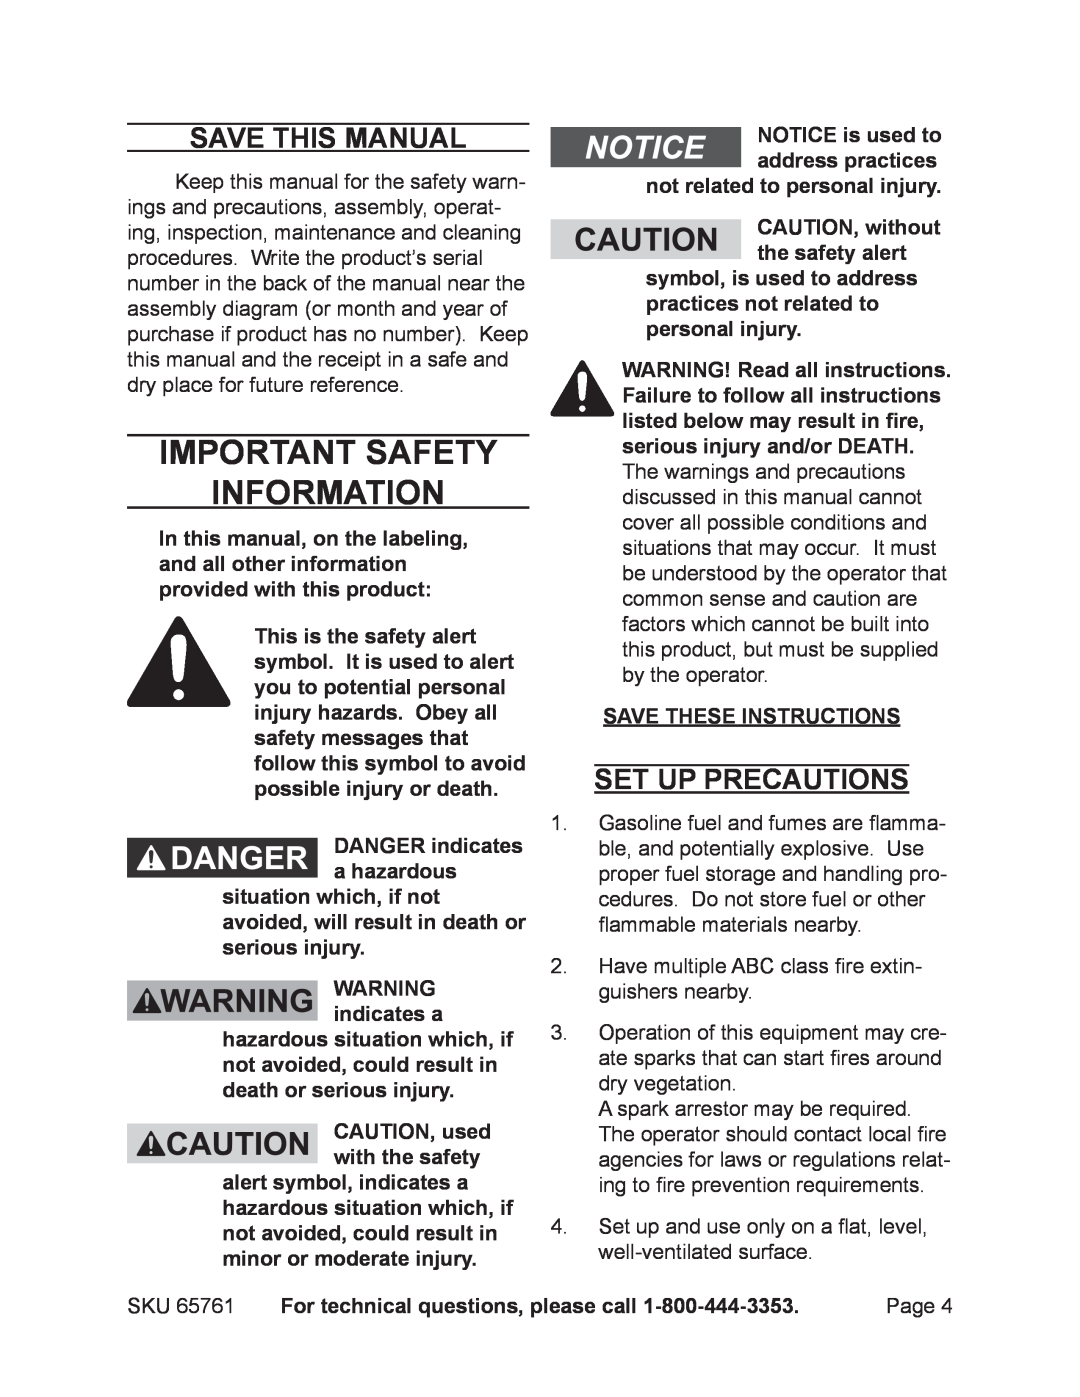 Harbor Freight Tools 65761 manual Important SAFETY Information, Save This Manual, Set up precautions, WARNING indicates a 